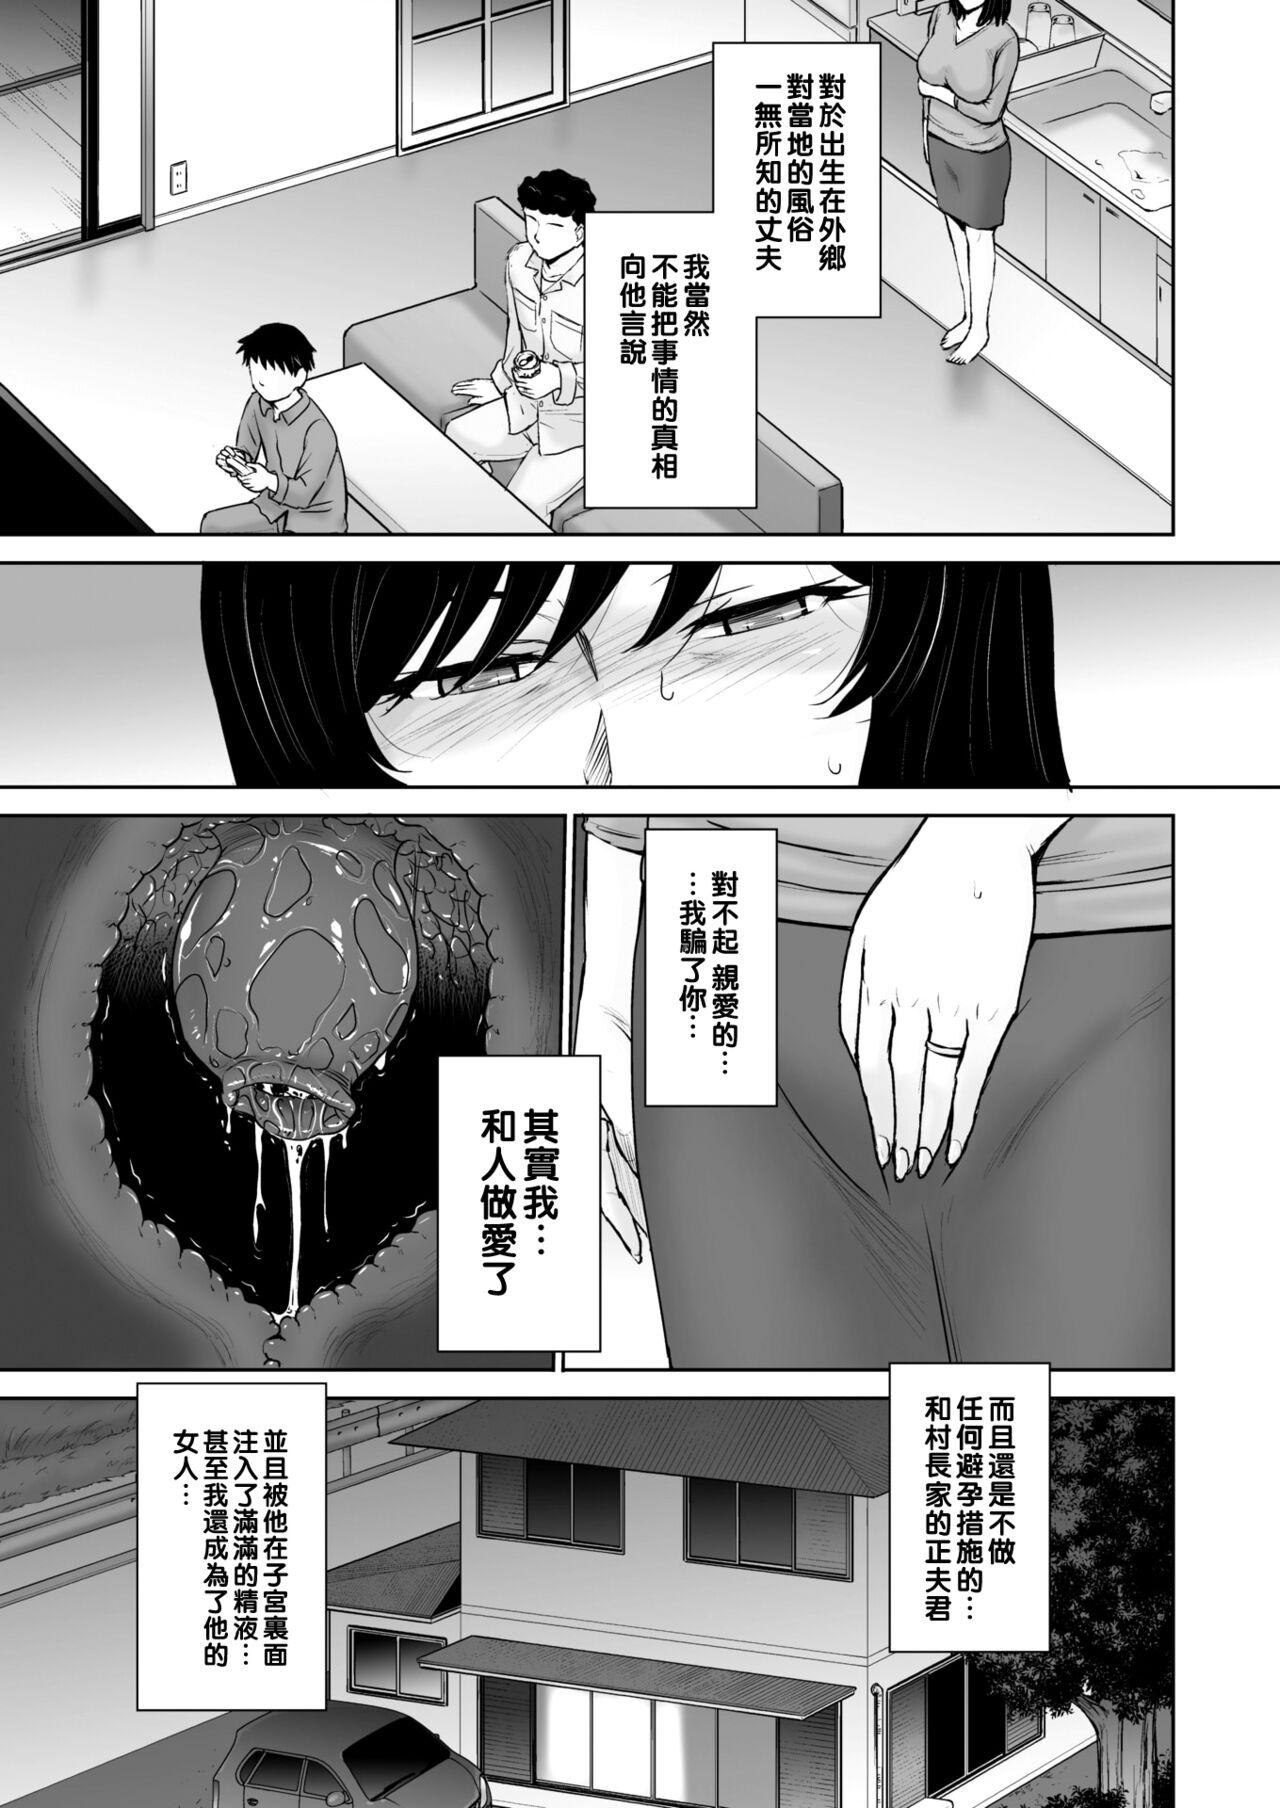 Cut 因習の虜2（Chinese） Messy - Page 5